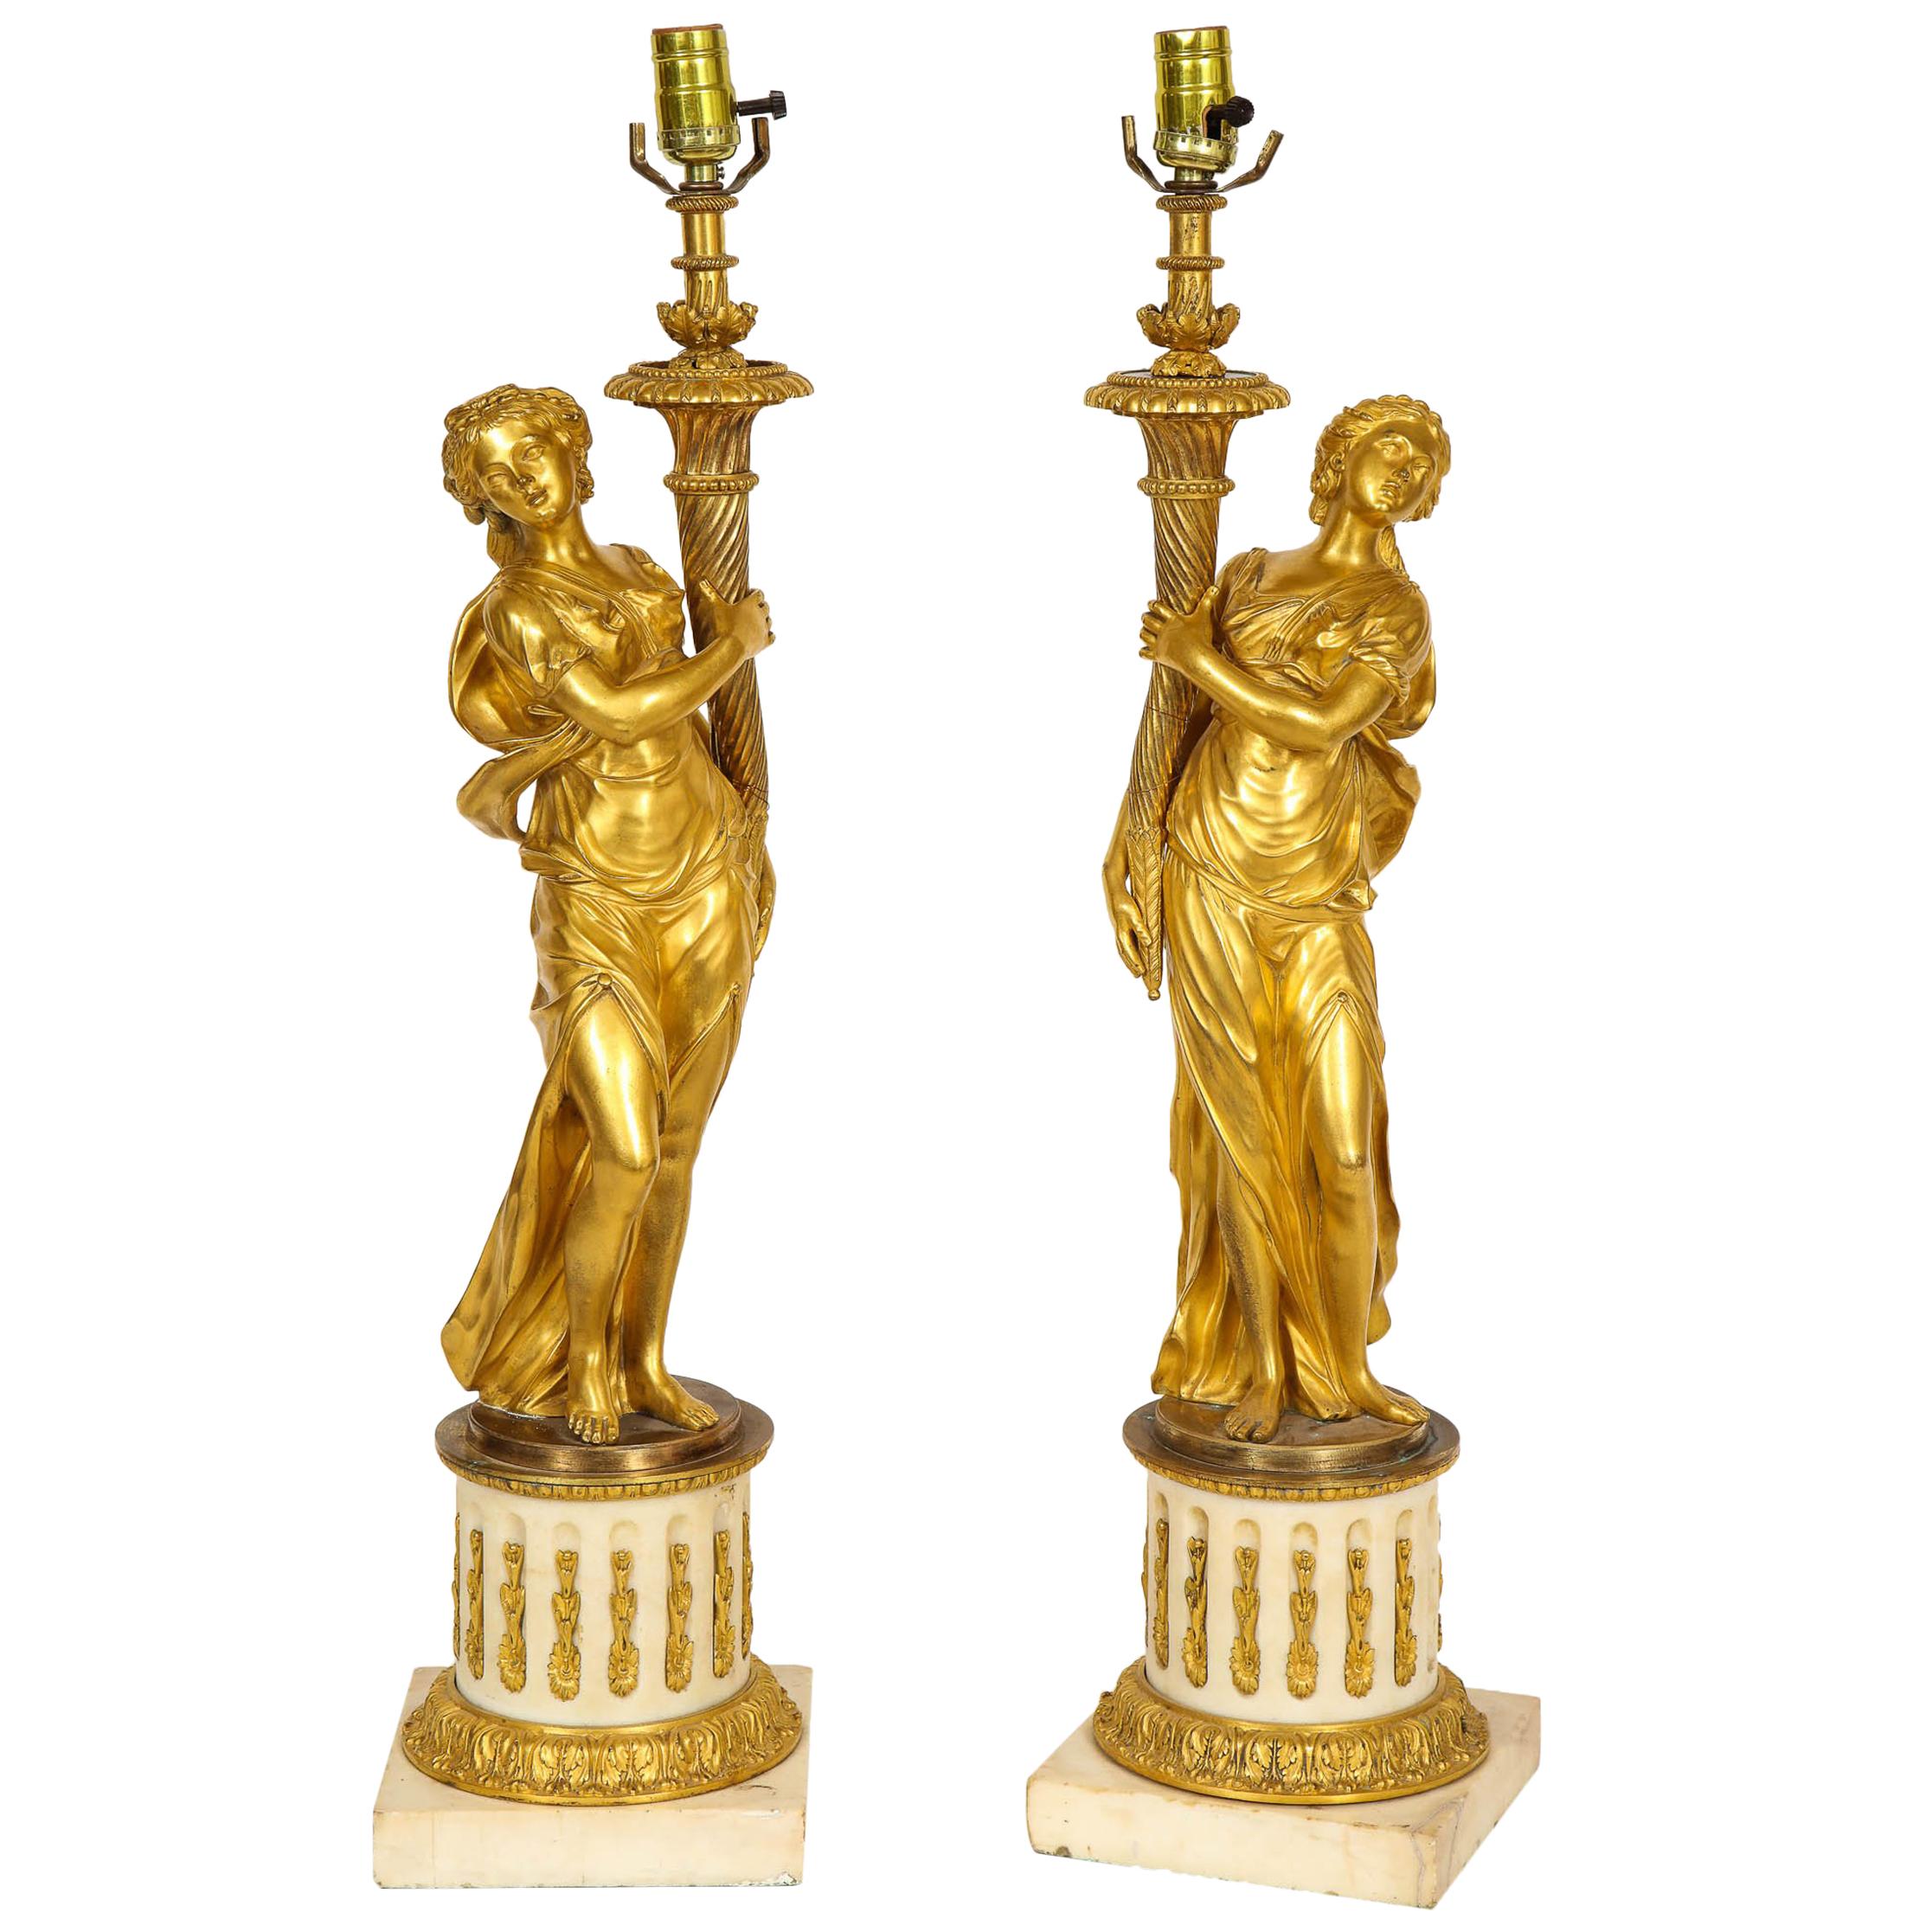 Pair of 18th Century Louis XVI Period Gilt-Bronze Figures of Maidens as Lamps